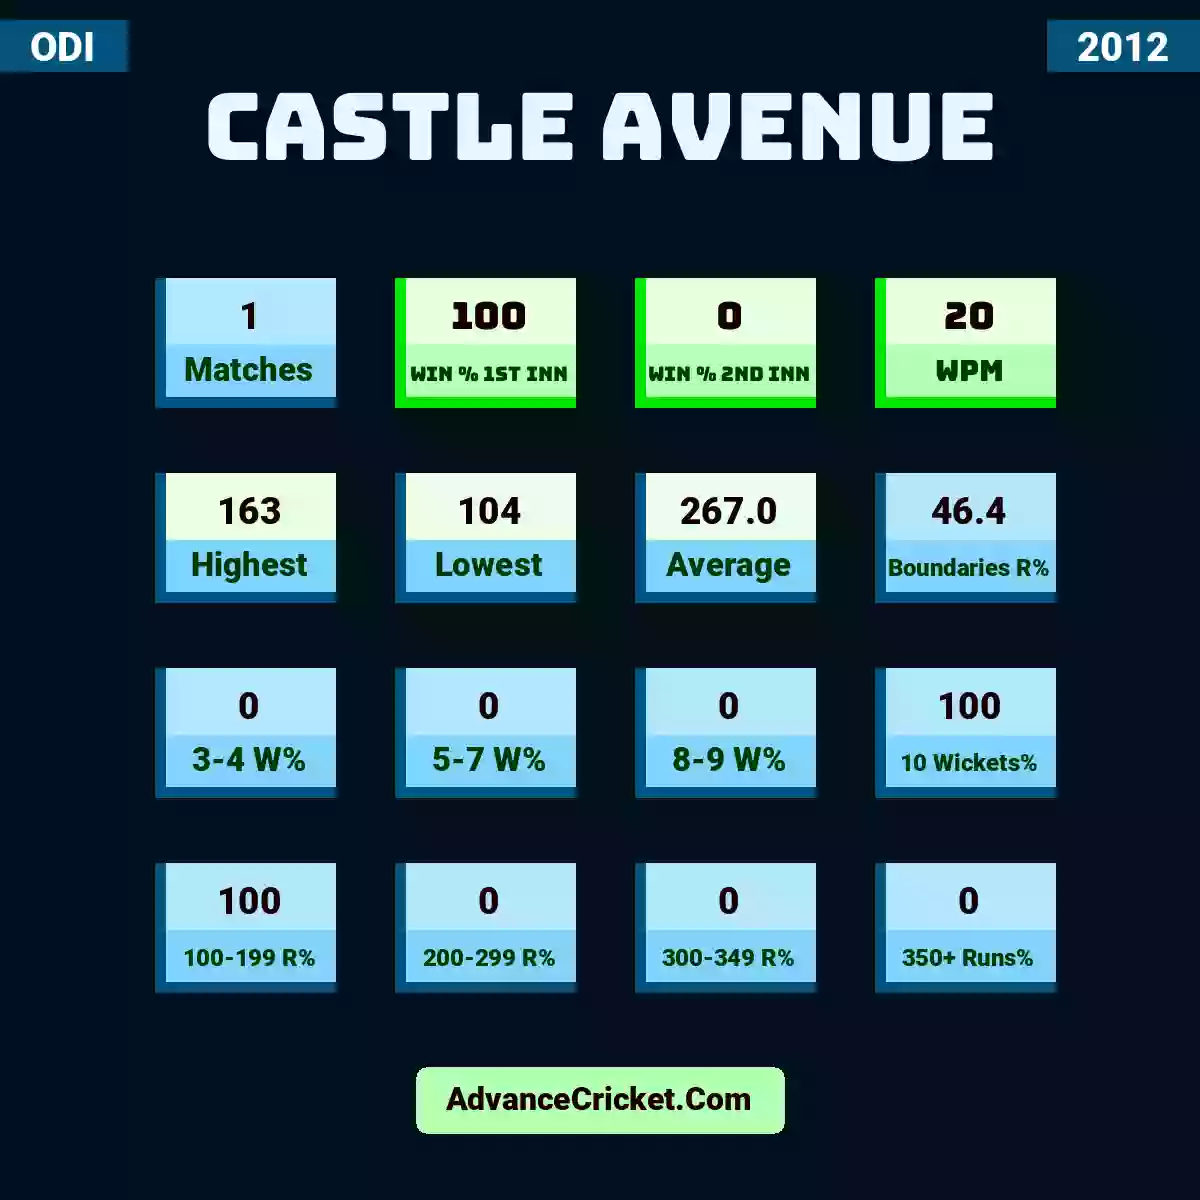 Image showing Castle Avenue with Matches: 1, Win % 1st Inn: 100, Win % 2nd Inn: 0, WPM: 20, Highest: 163, Lowest: 104, Average: 267.0, Boundaries R%: 46.4, 3-4 W%: 0, 5-7 W%: 0, 8-9 W%: 0, 10 Wickets%: 100, 100-199 R%: 100, 200-299 R%: 0, 300-349 R%: 0, 350+ Runs%: 0.